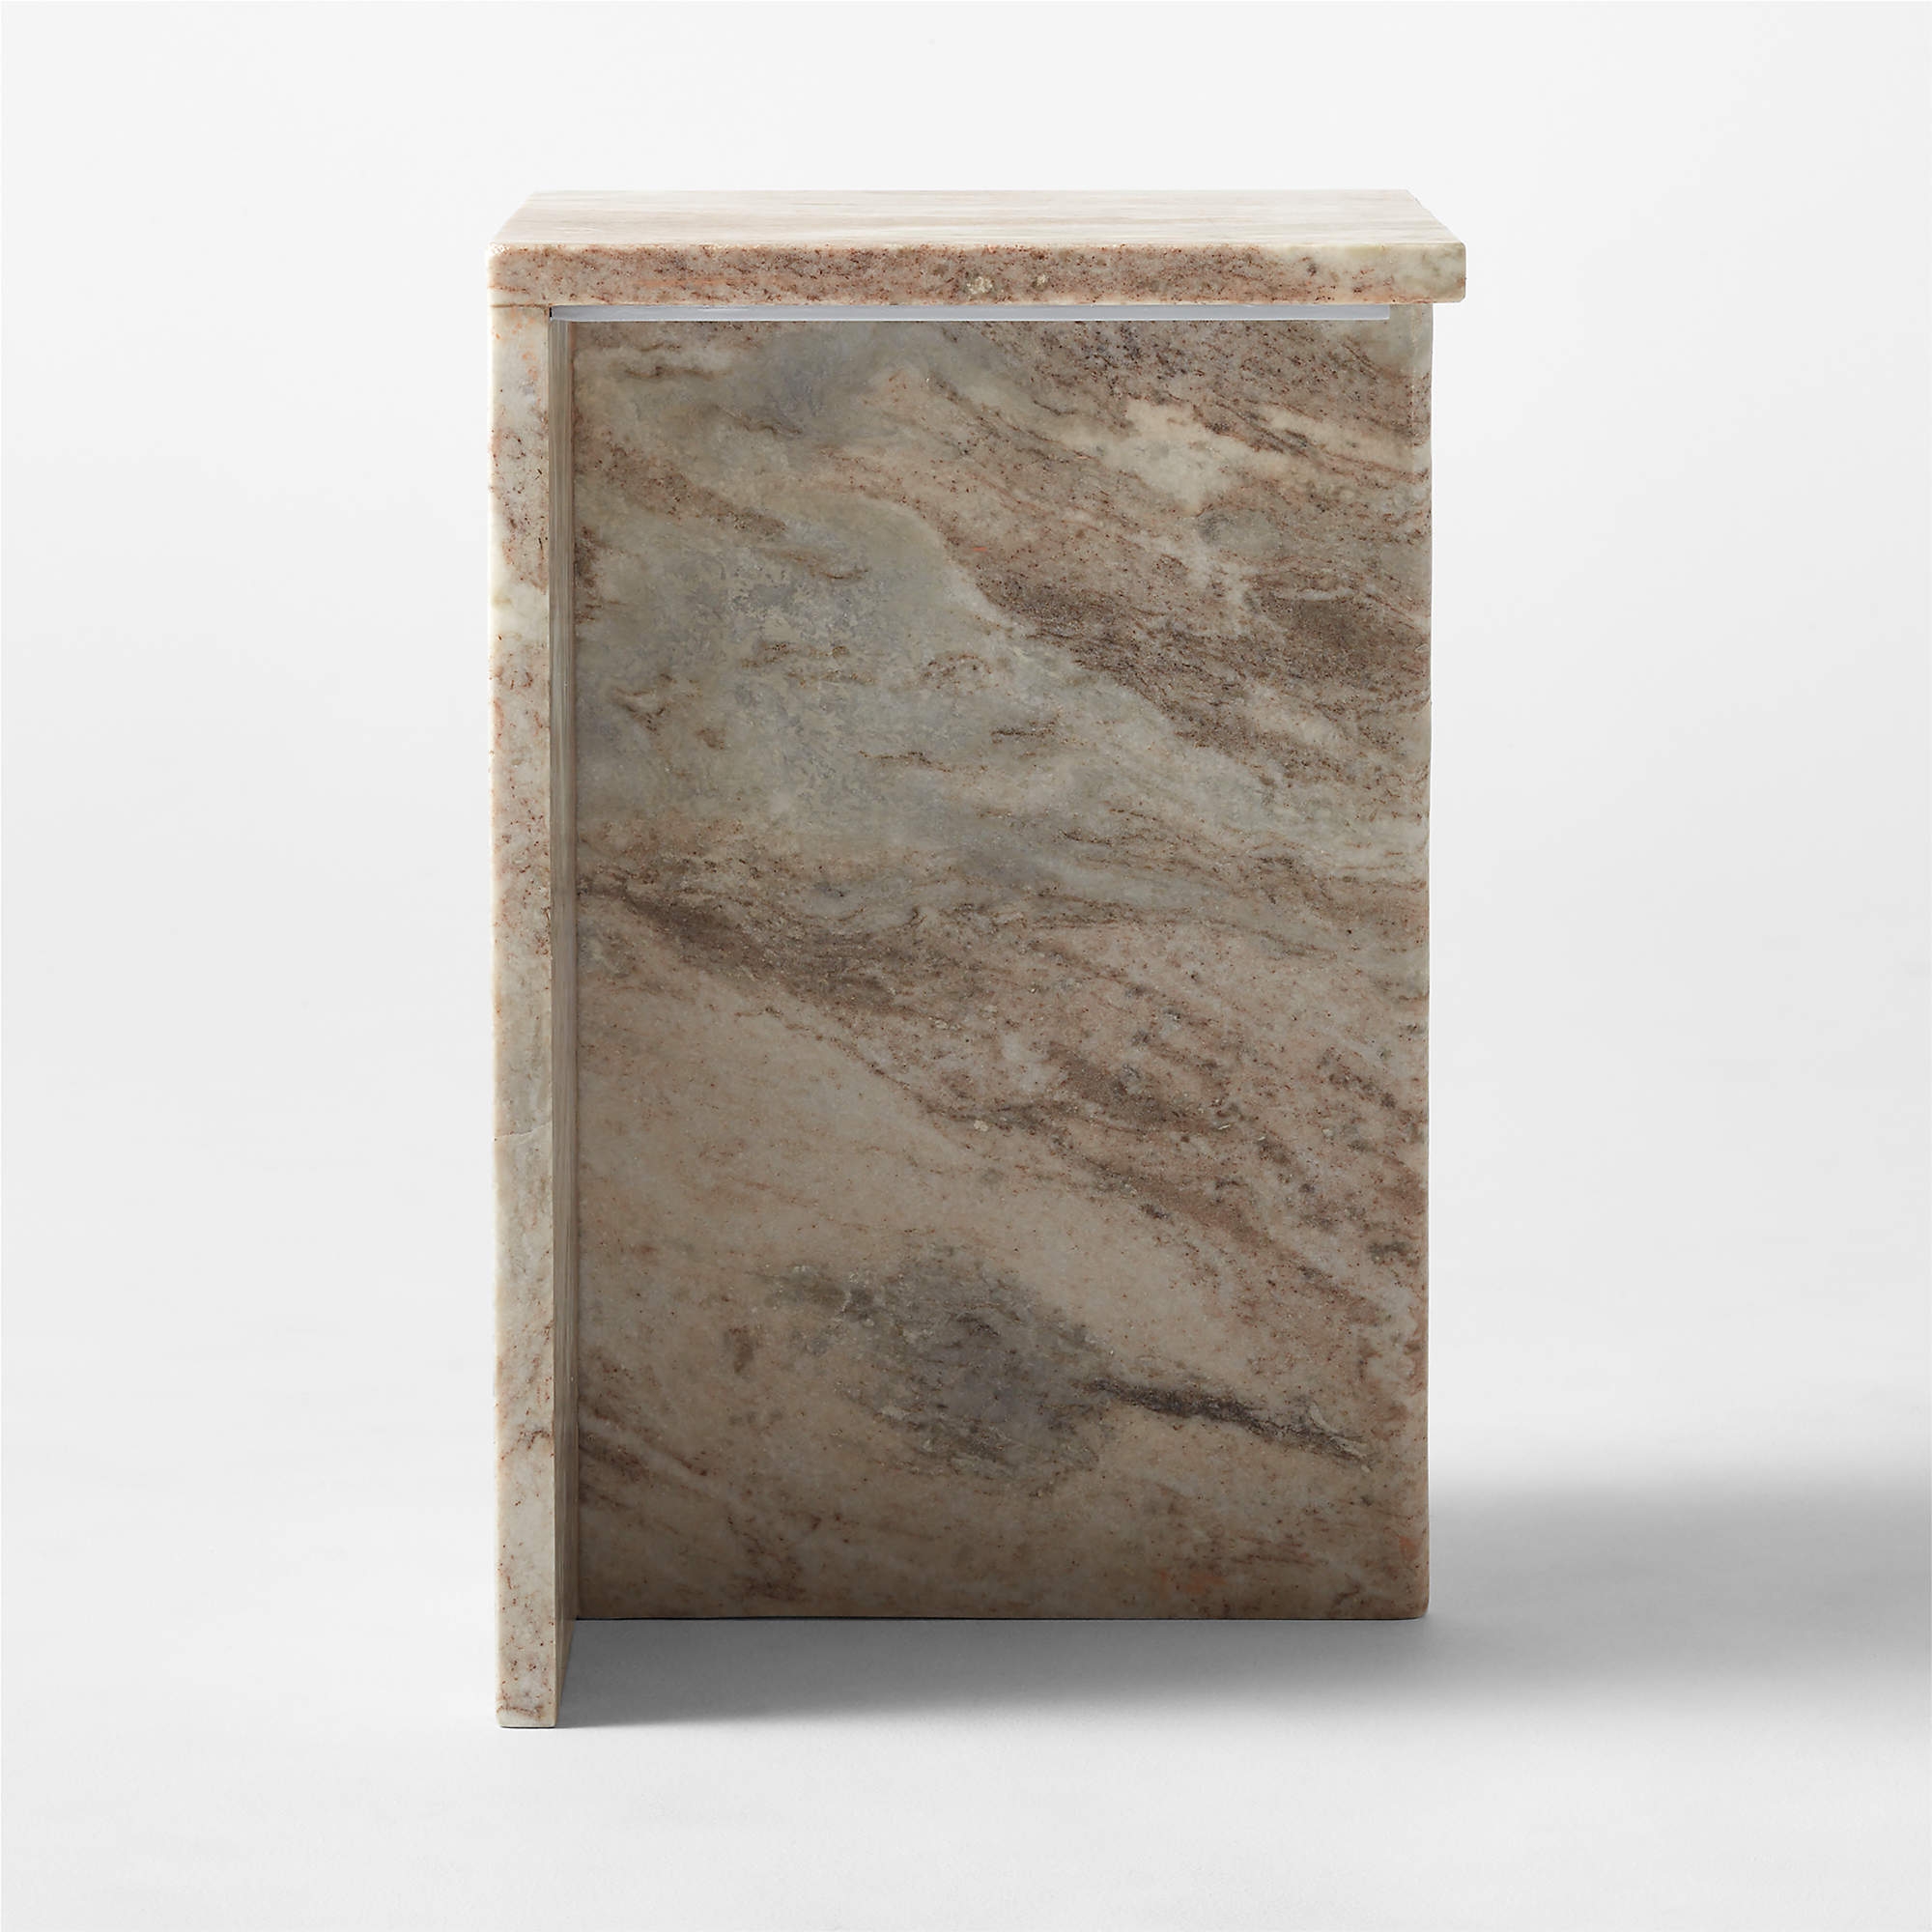 T Marble Side Table, Tall, Restock in early December - Image 3